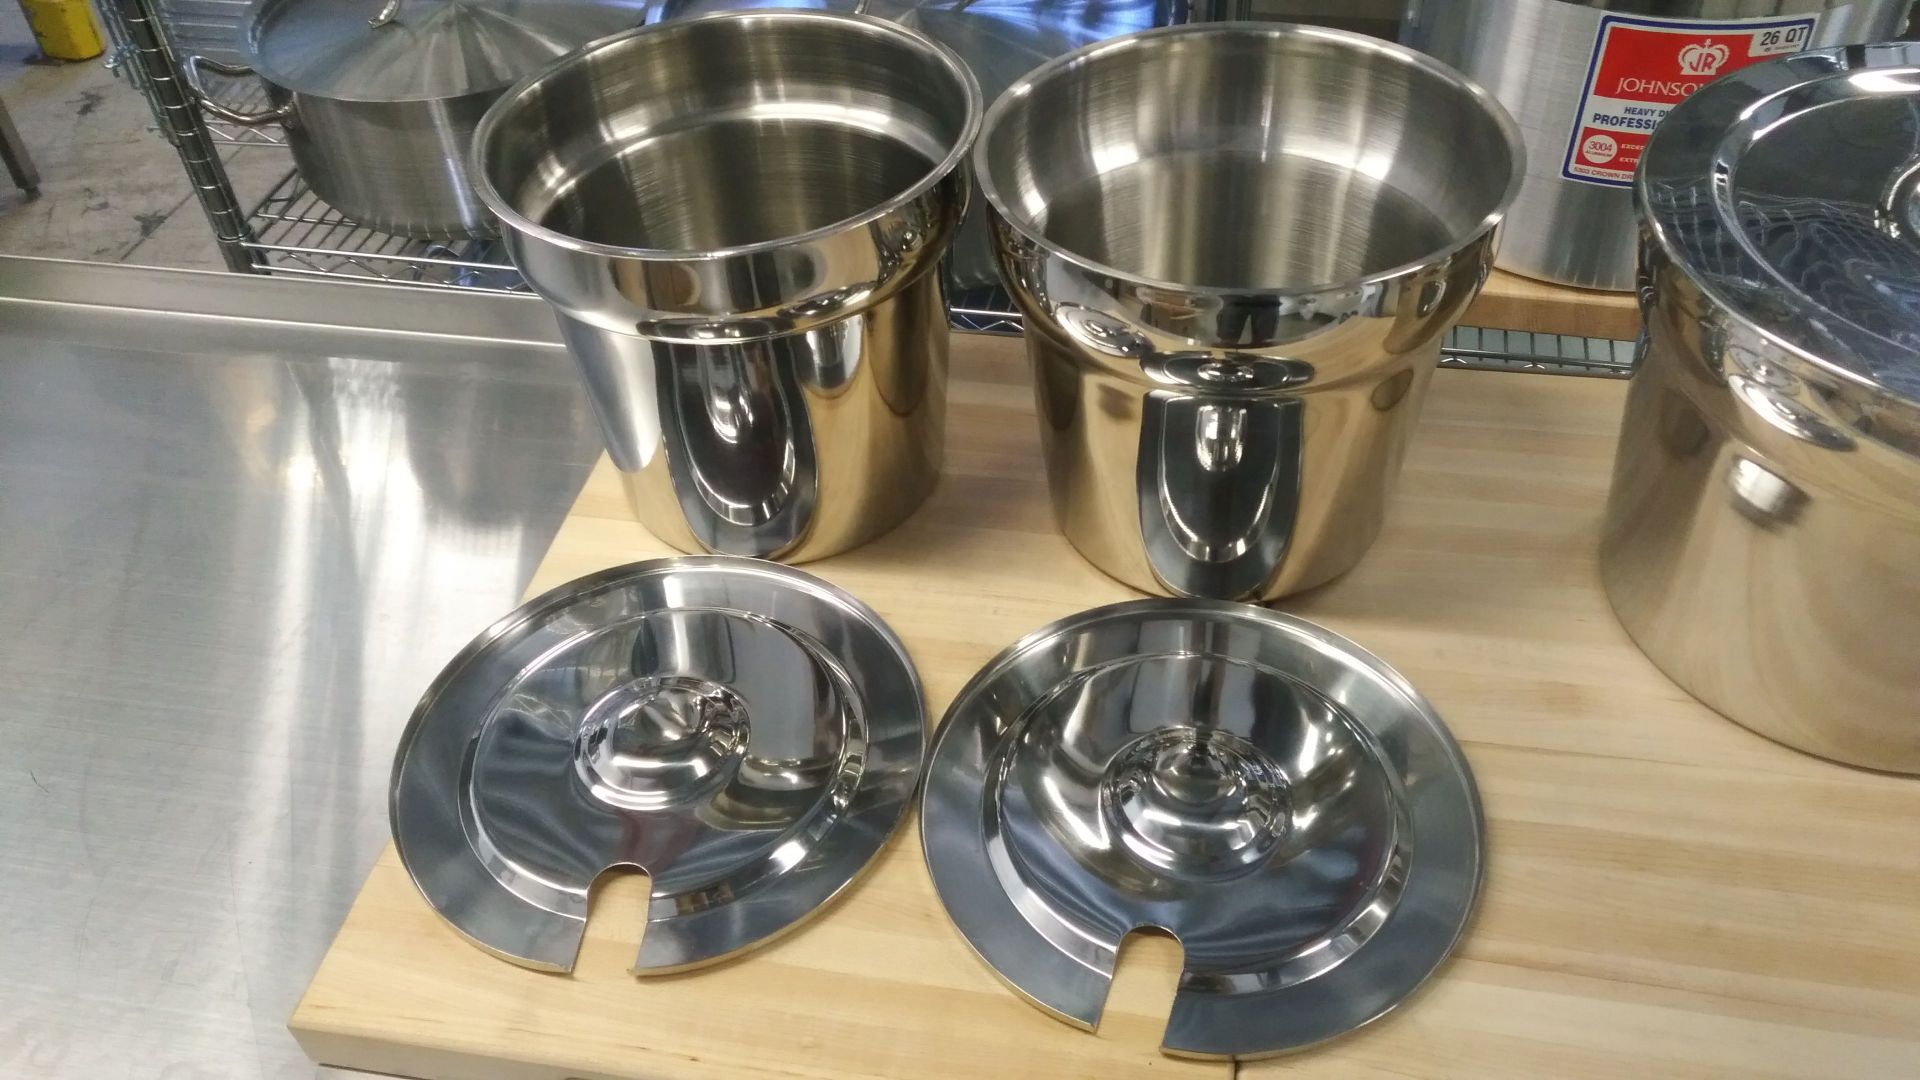 7qt Round Stainless Inserts with Slotted Lids - Lot of 2